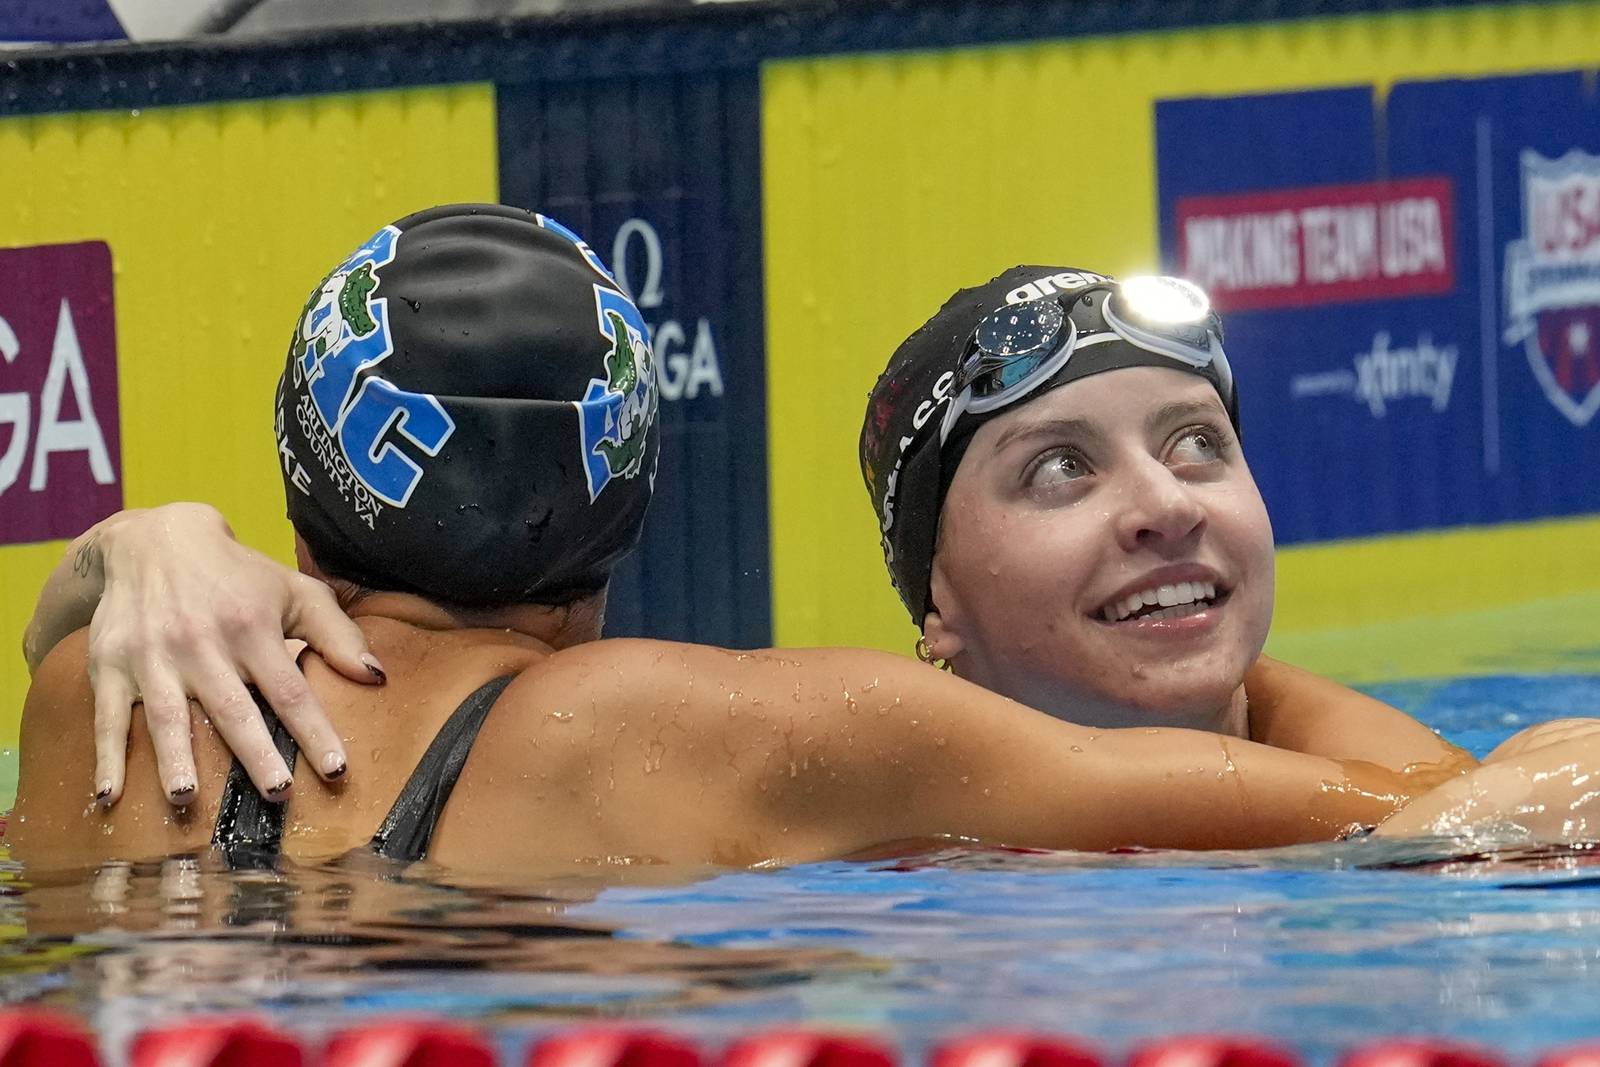 Douglass wins 100 free at US swim trials, Manuel relegated to relay